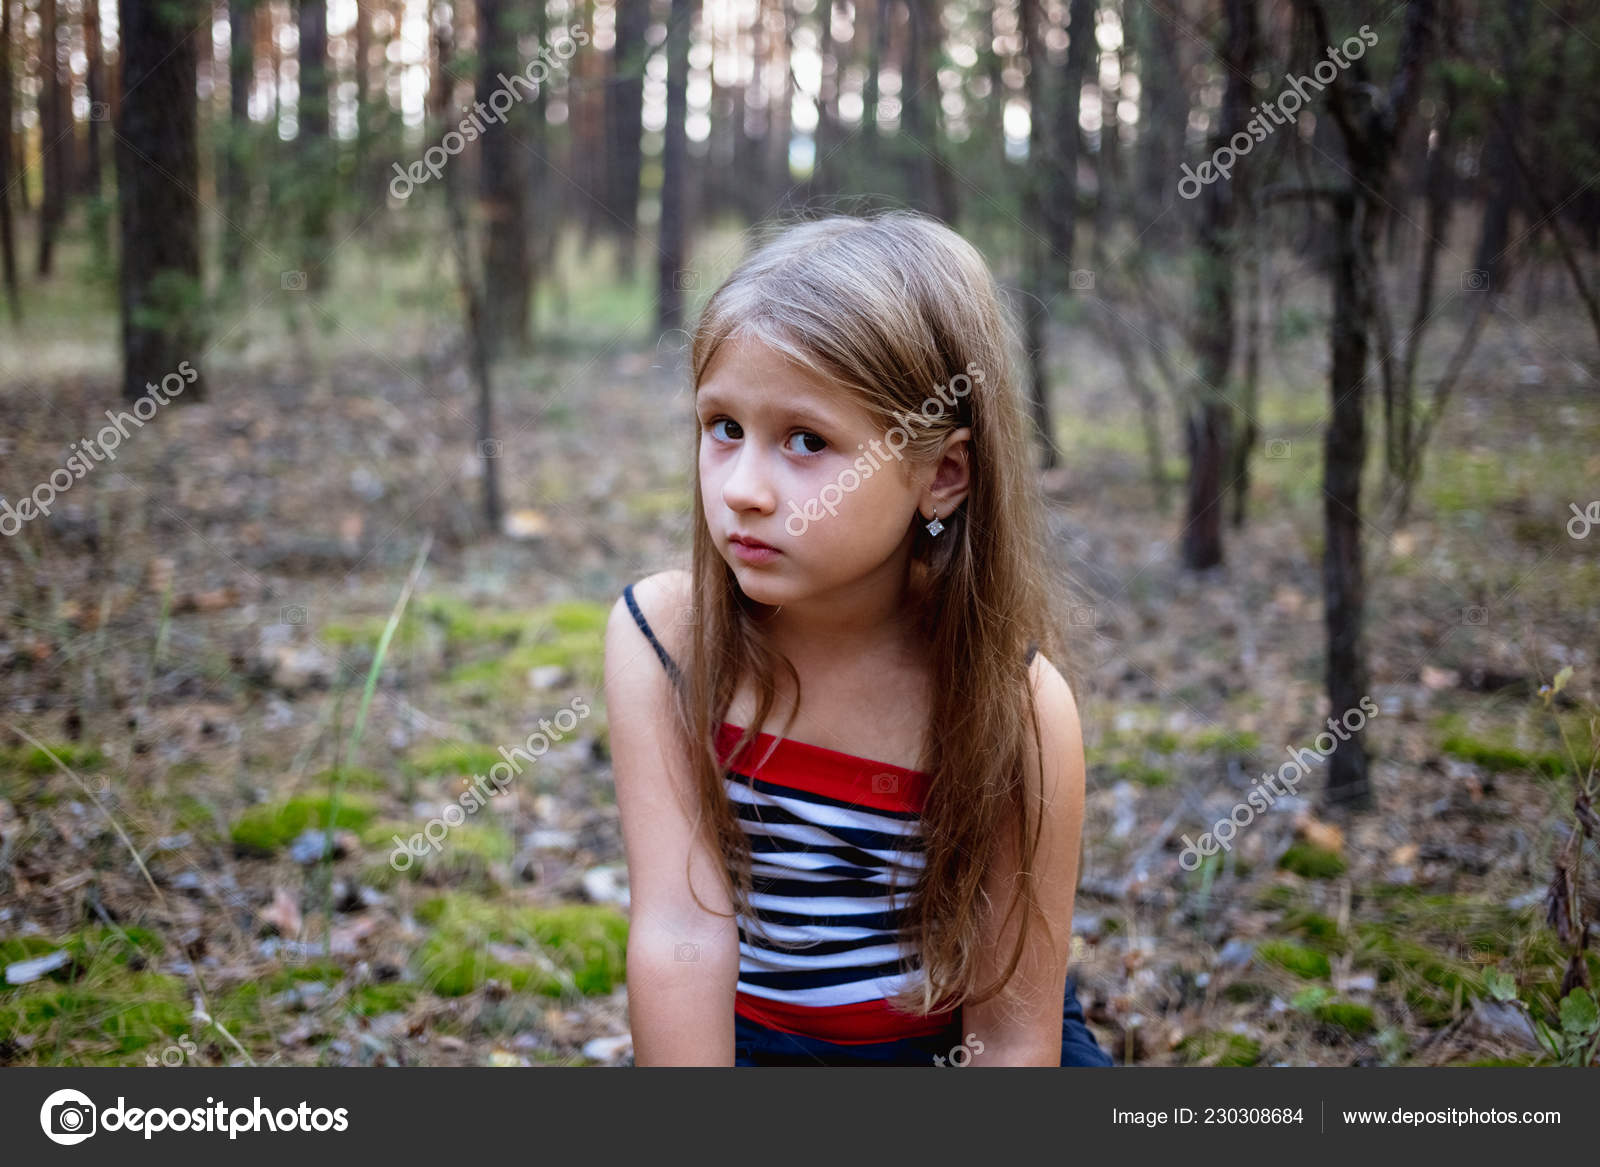 Little girl in forest creek Stock Photos and Images